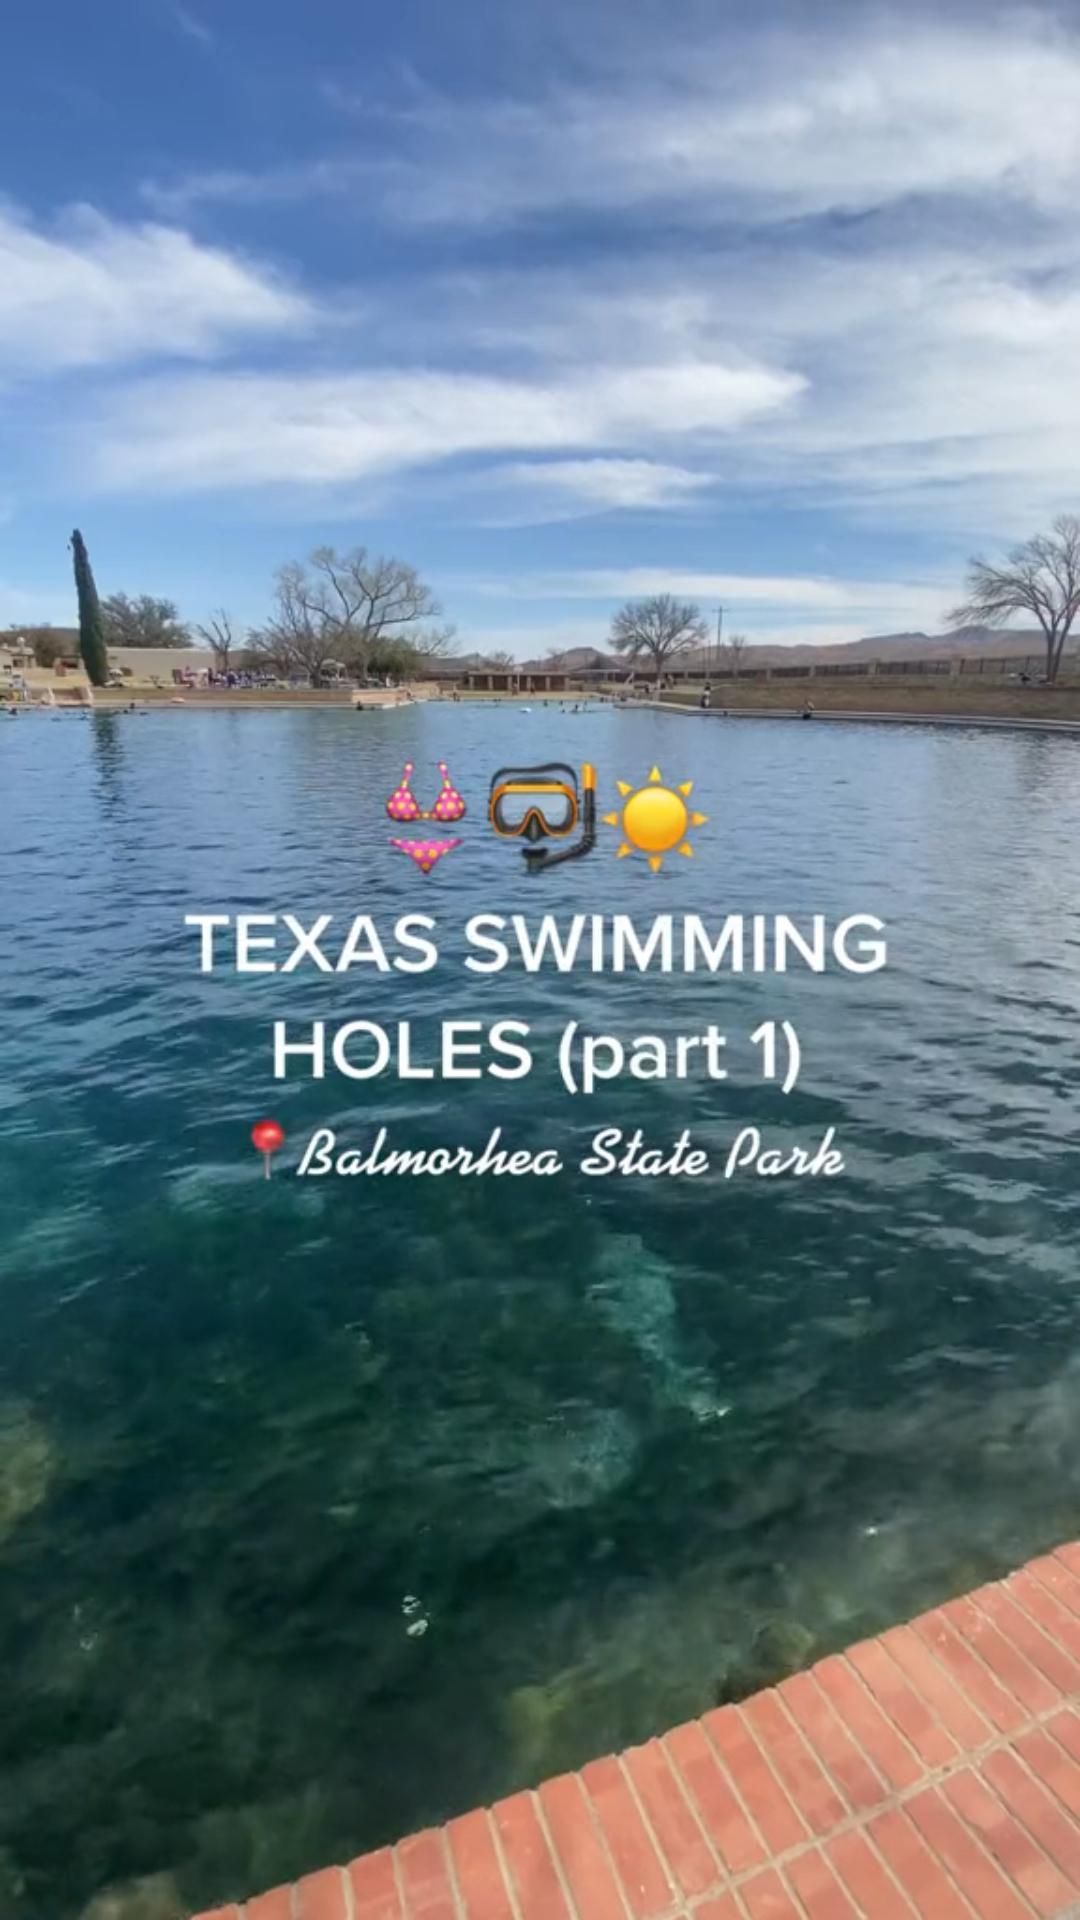 Balmorhea State Park 🏊🏼‍♀️ Add this one to your Texas road trip list!